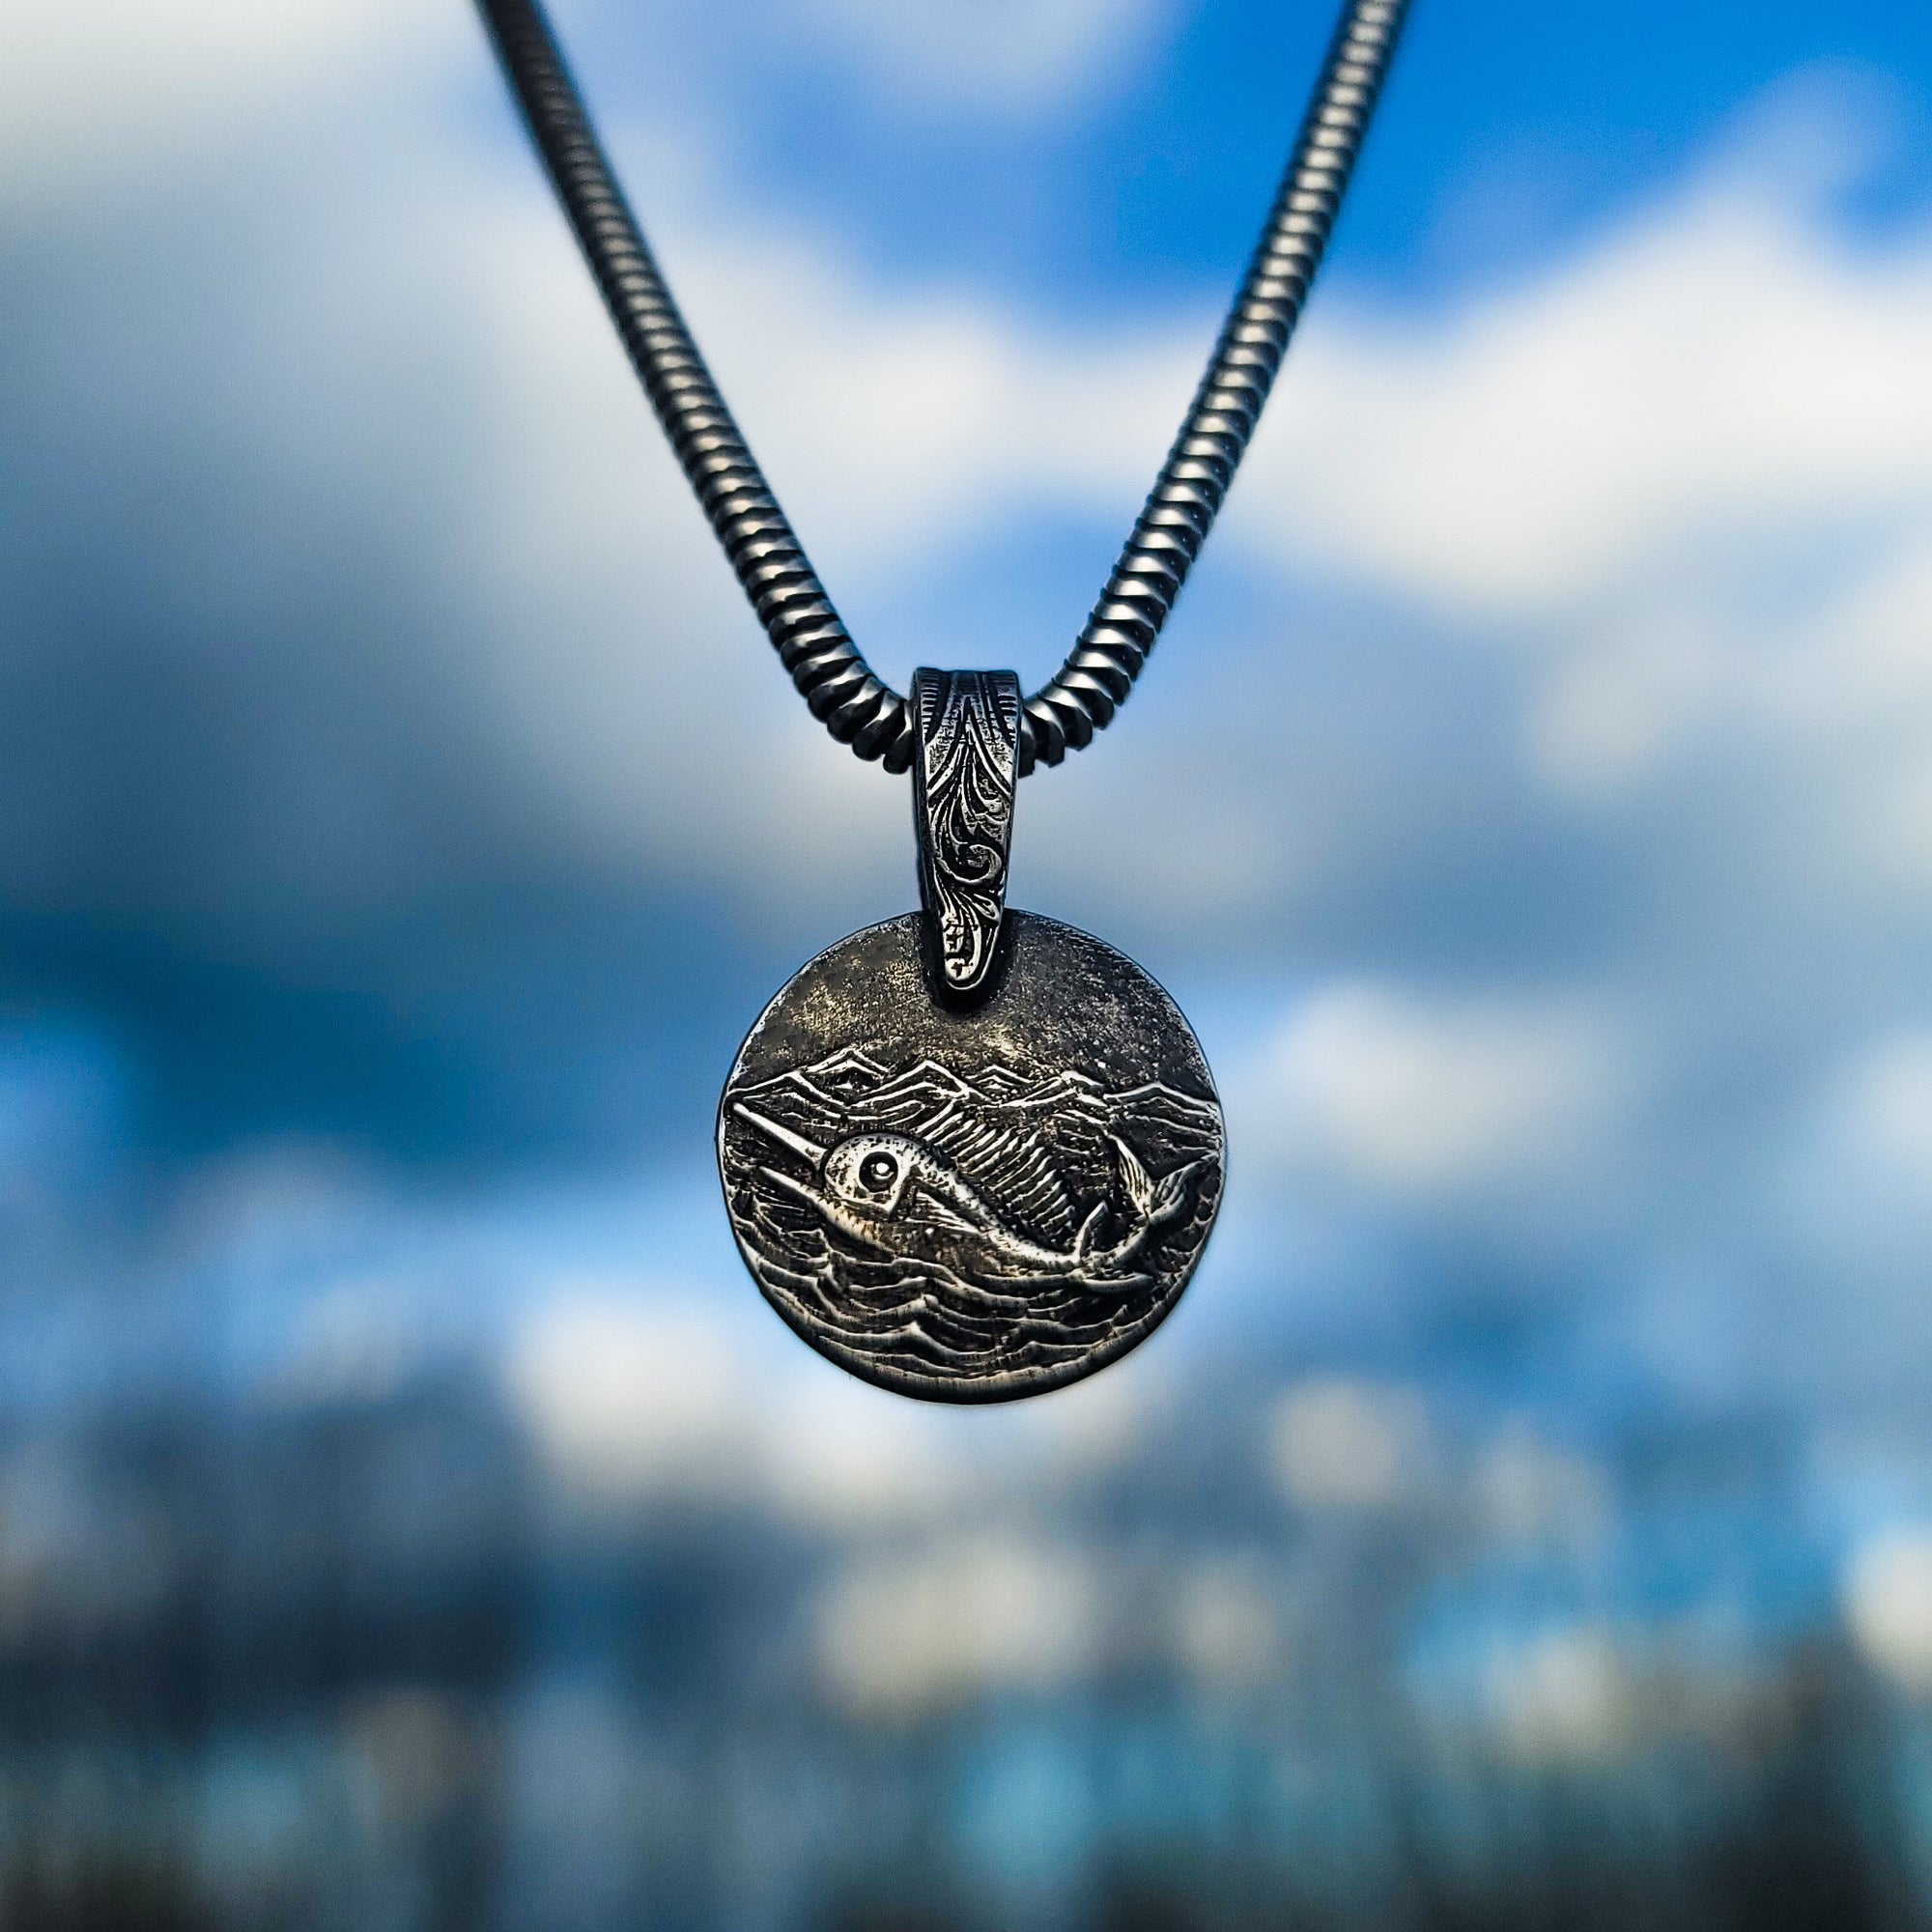 Pictured is our exquisite handmade sterling silver Swordfish in Silver Seas pendant. The pendant is suspended in front of an out-of-focus cloudy sky, creating a beautiful contrast against the intricate design of the swordfish swimming in the ocean